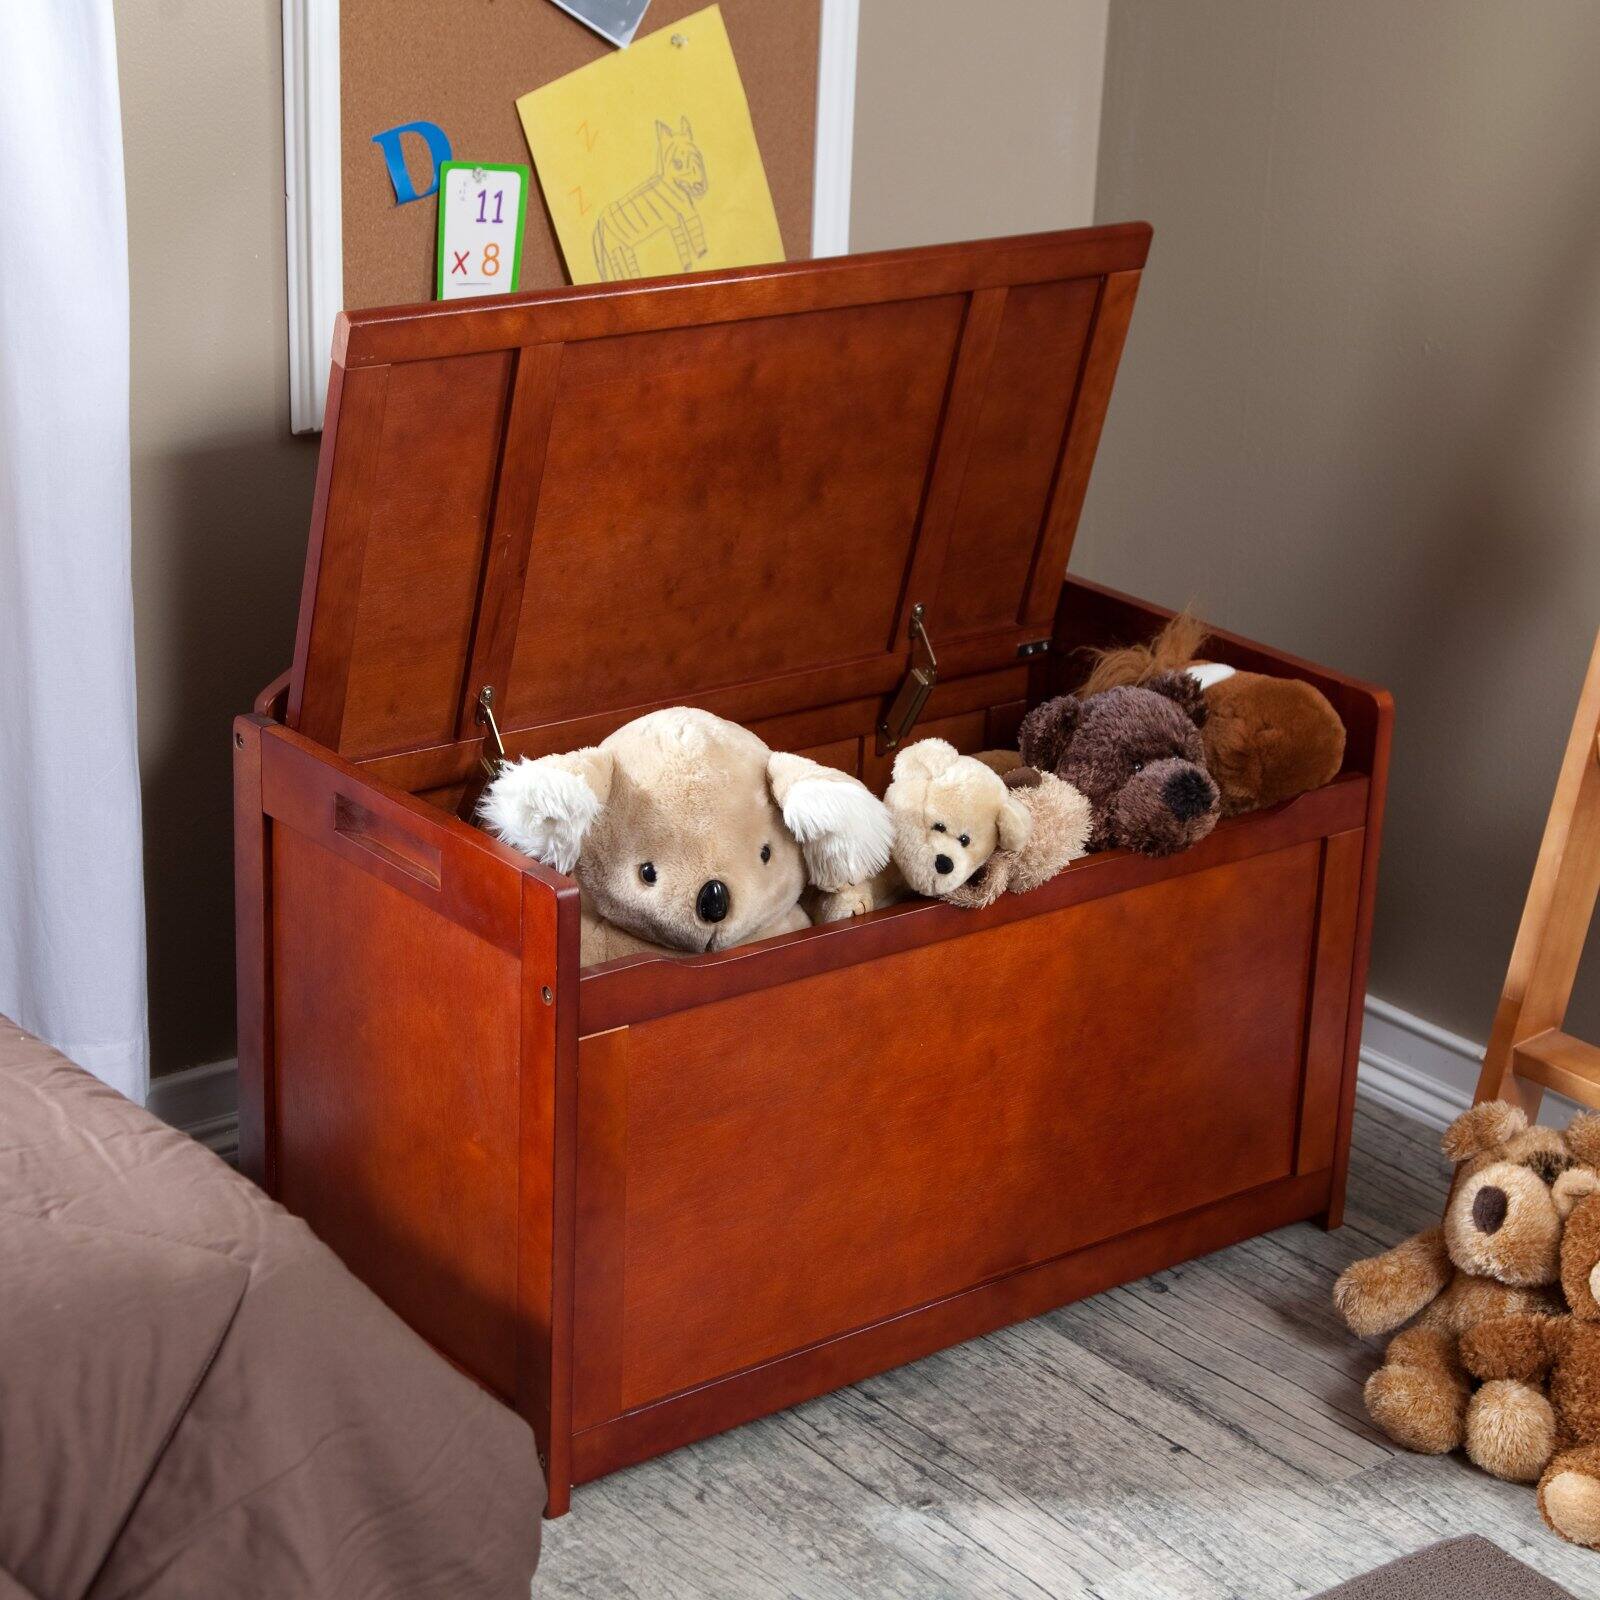 Lipper Child's Toy Chest, Walnut Finish - External Dimensions: 33.3" Width x 17.8" Depth x 24.3" Height - Hinged Closure - Beech Wood, Medium Density Fiberboard (MDF) - Walnut - For Toy - 1 / Pack - image 3 of 8